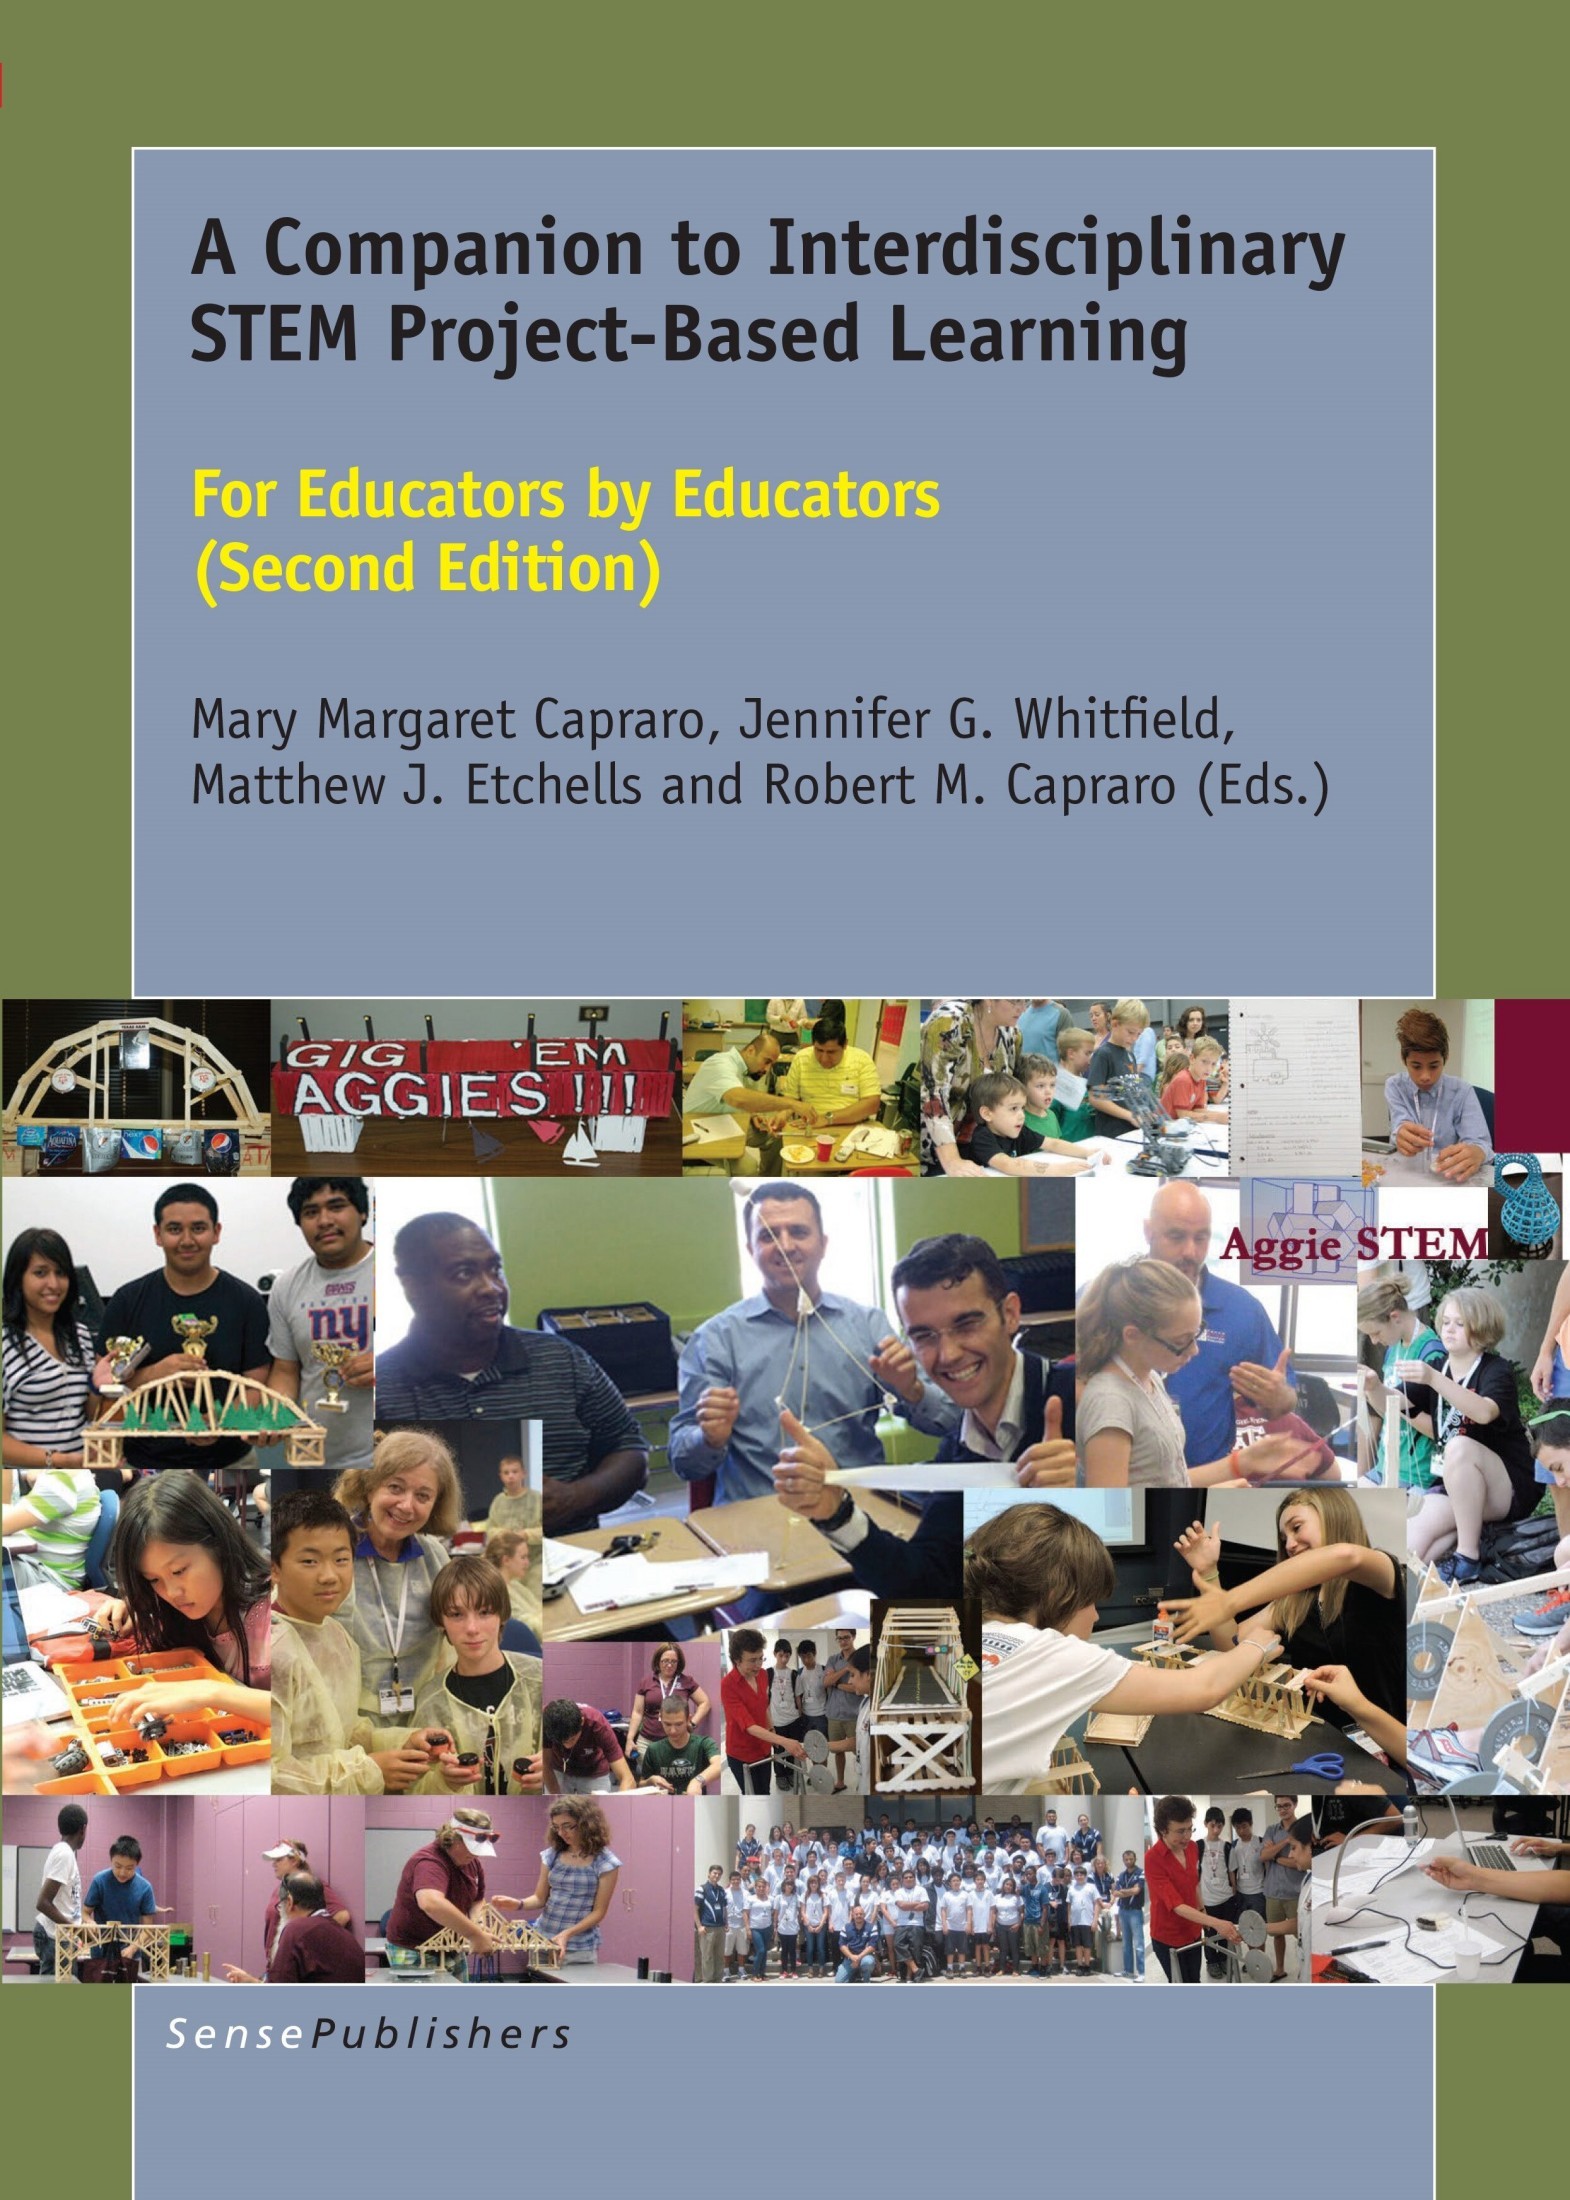 STEM Project-Based Learning: An Integrated Science, Technology, Engineering, and Mathematics (STEM) Approach